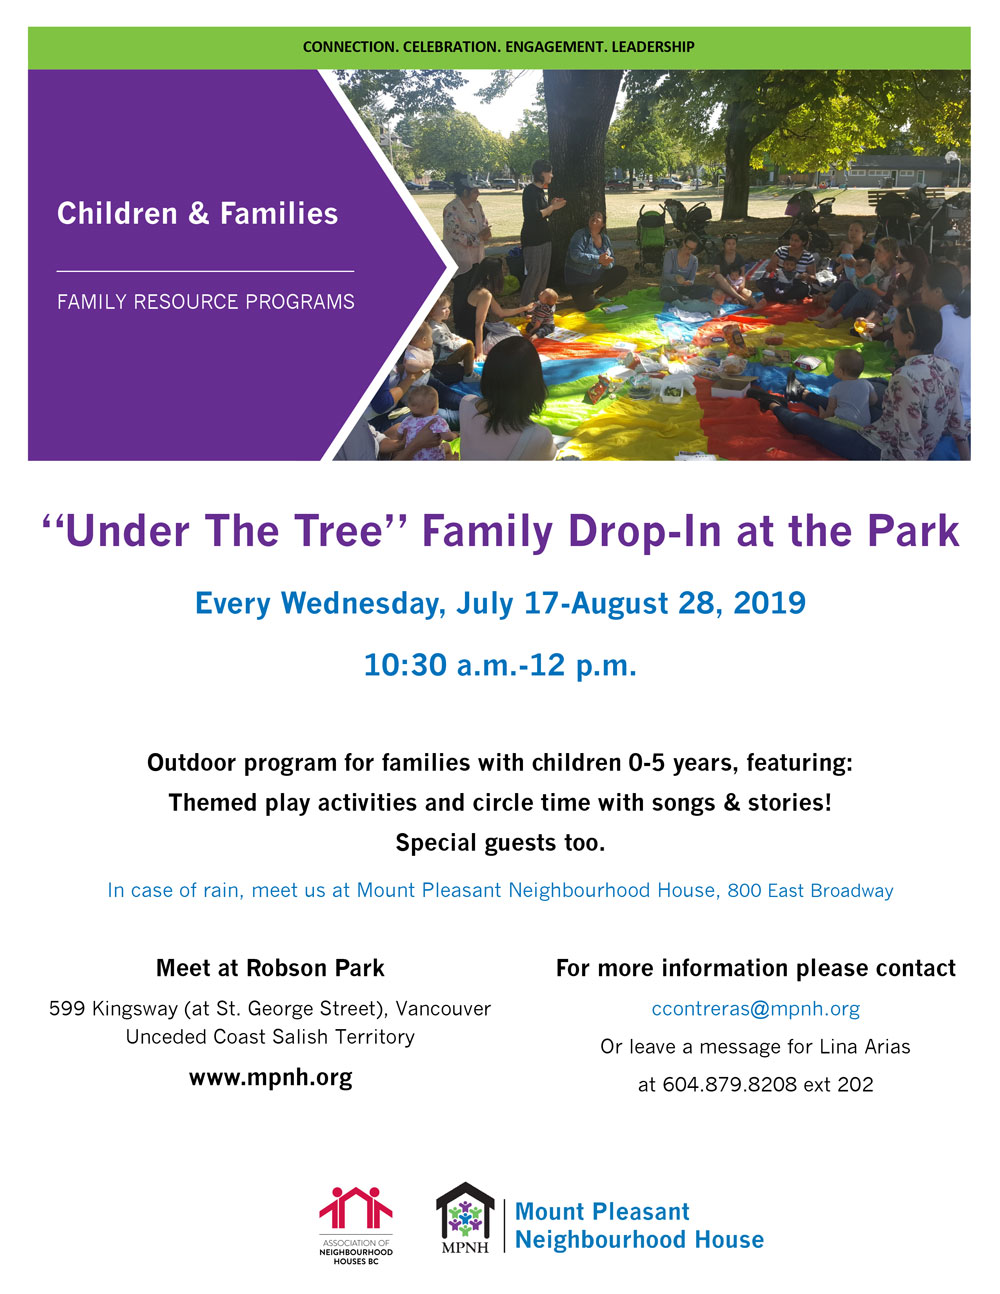 An image of the poster with program details, featuringa large group of parents and kids sitting on a brightly coloured parachute, have a picnic under the tree at Robson Park.